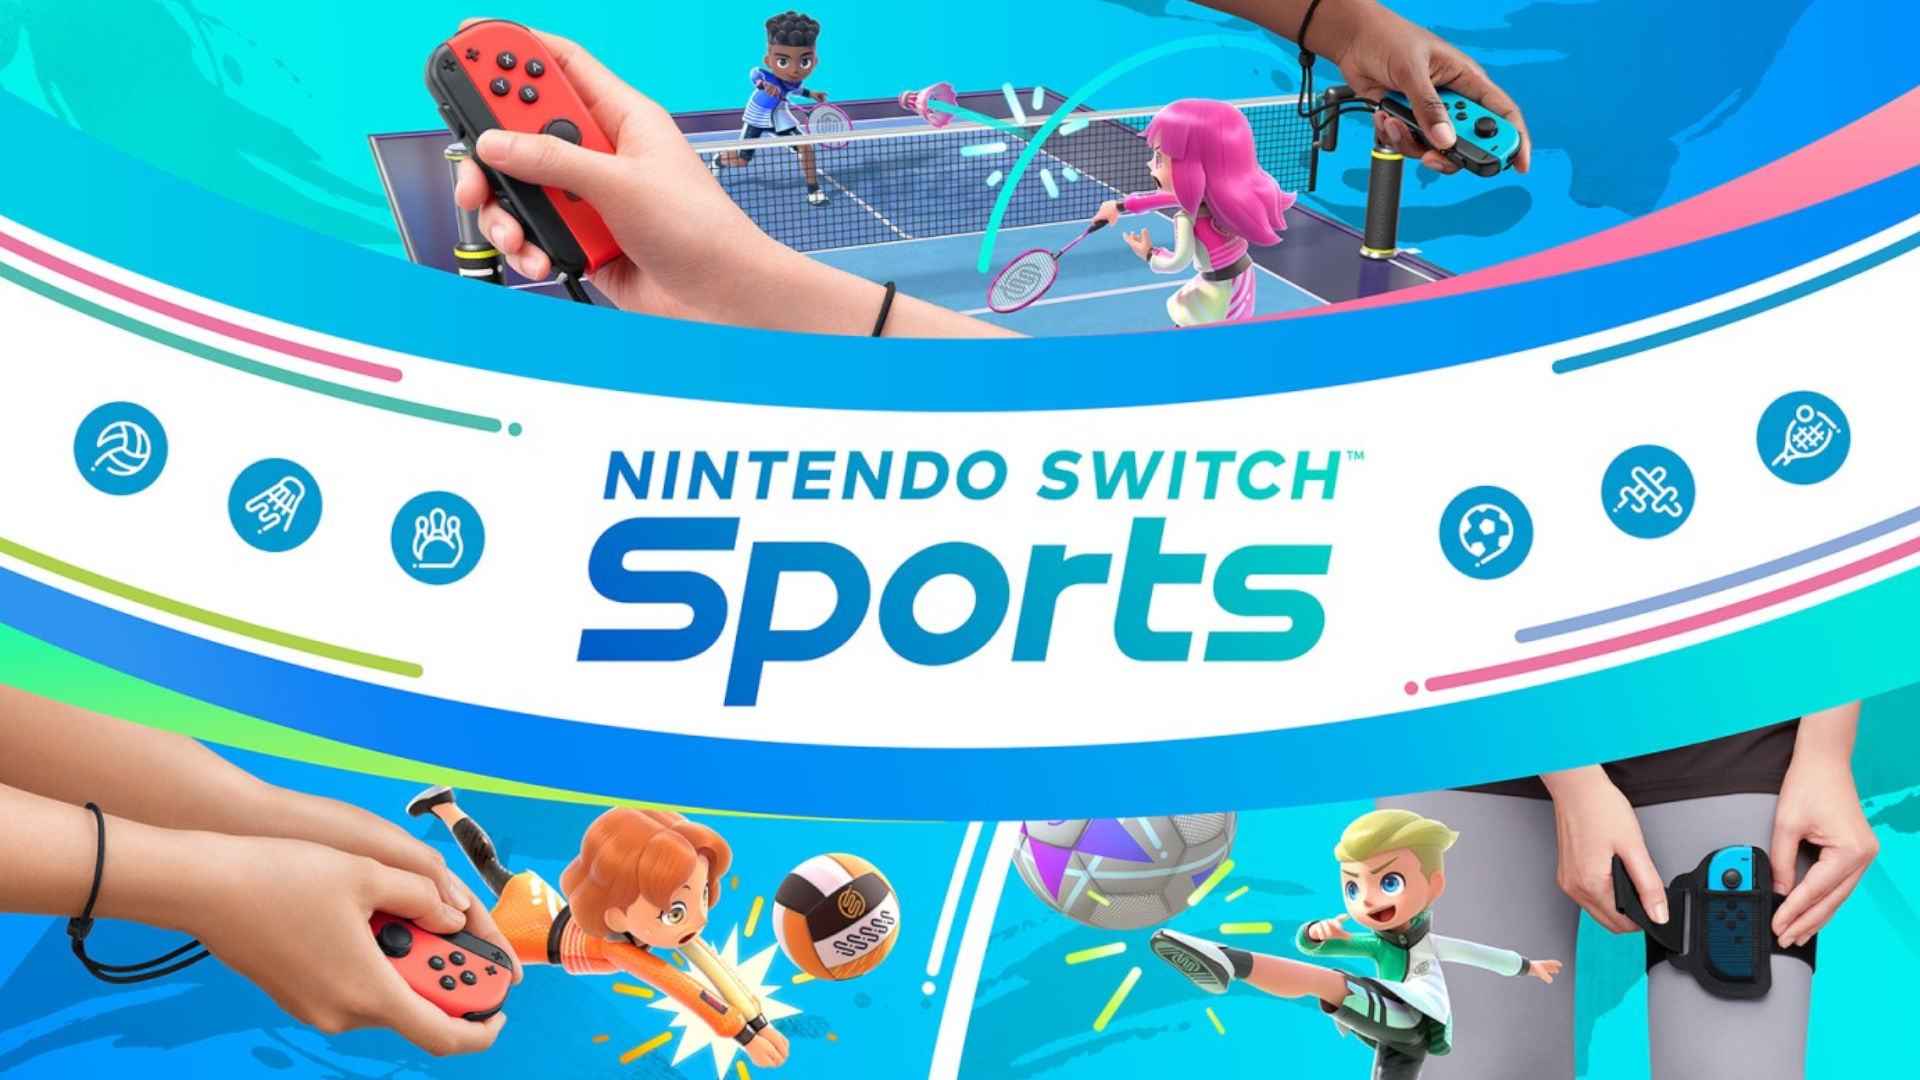 Cover art for Nintendo Switch Sports, one of the upcoming tennis games on Switch